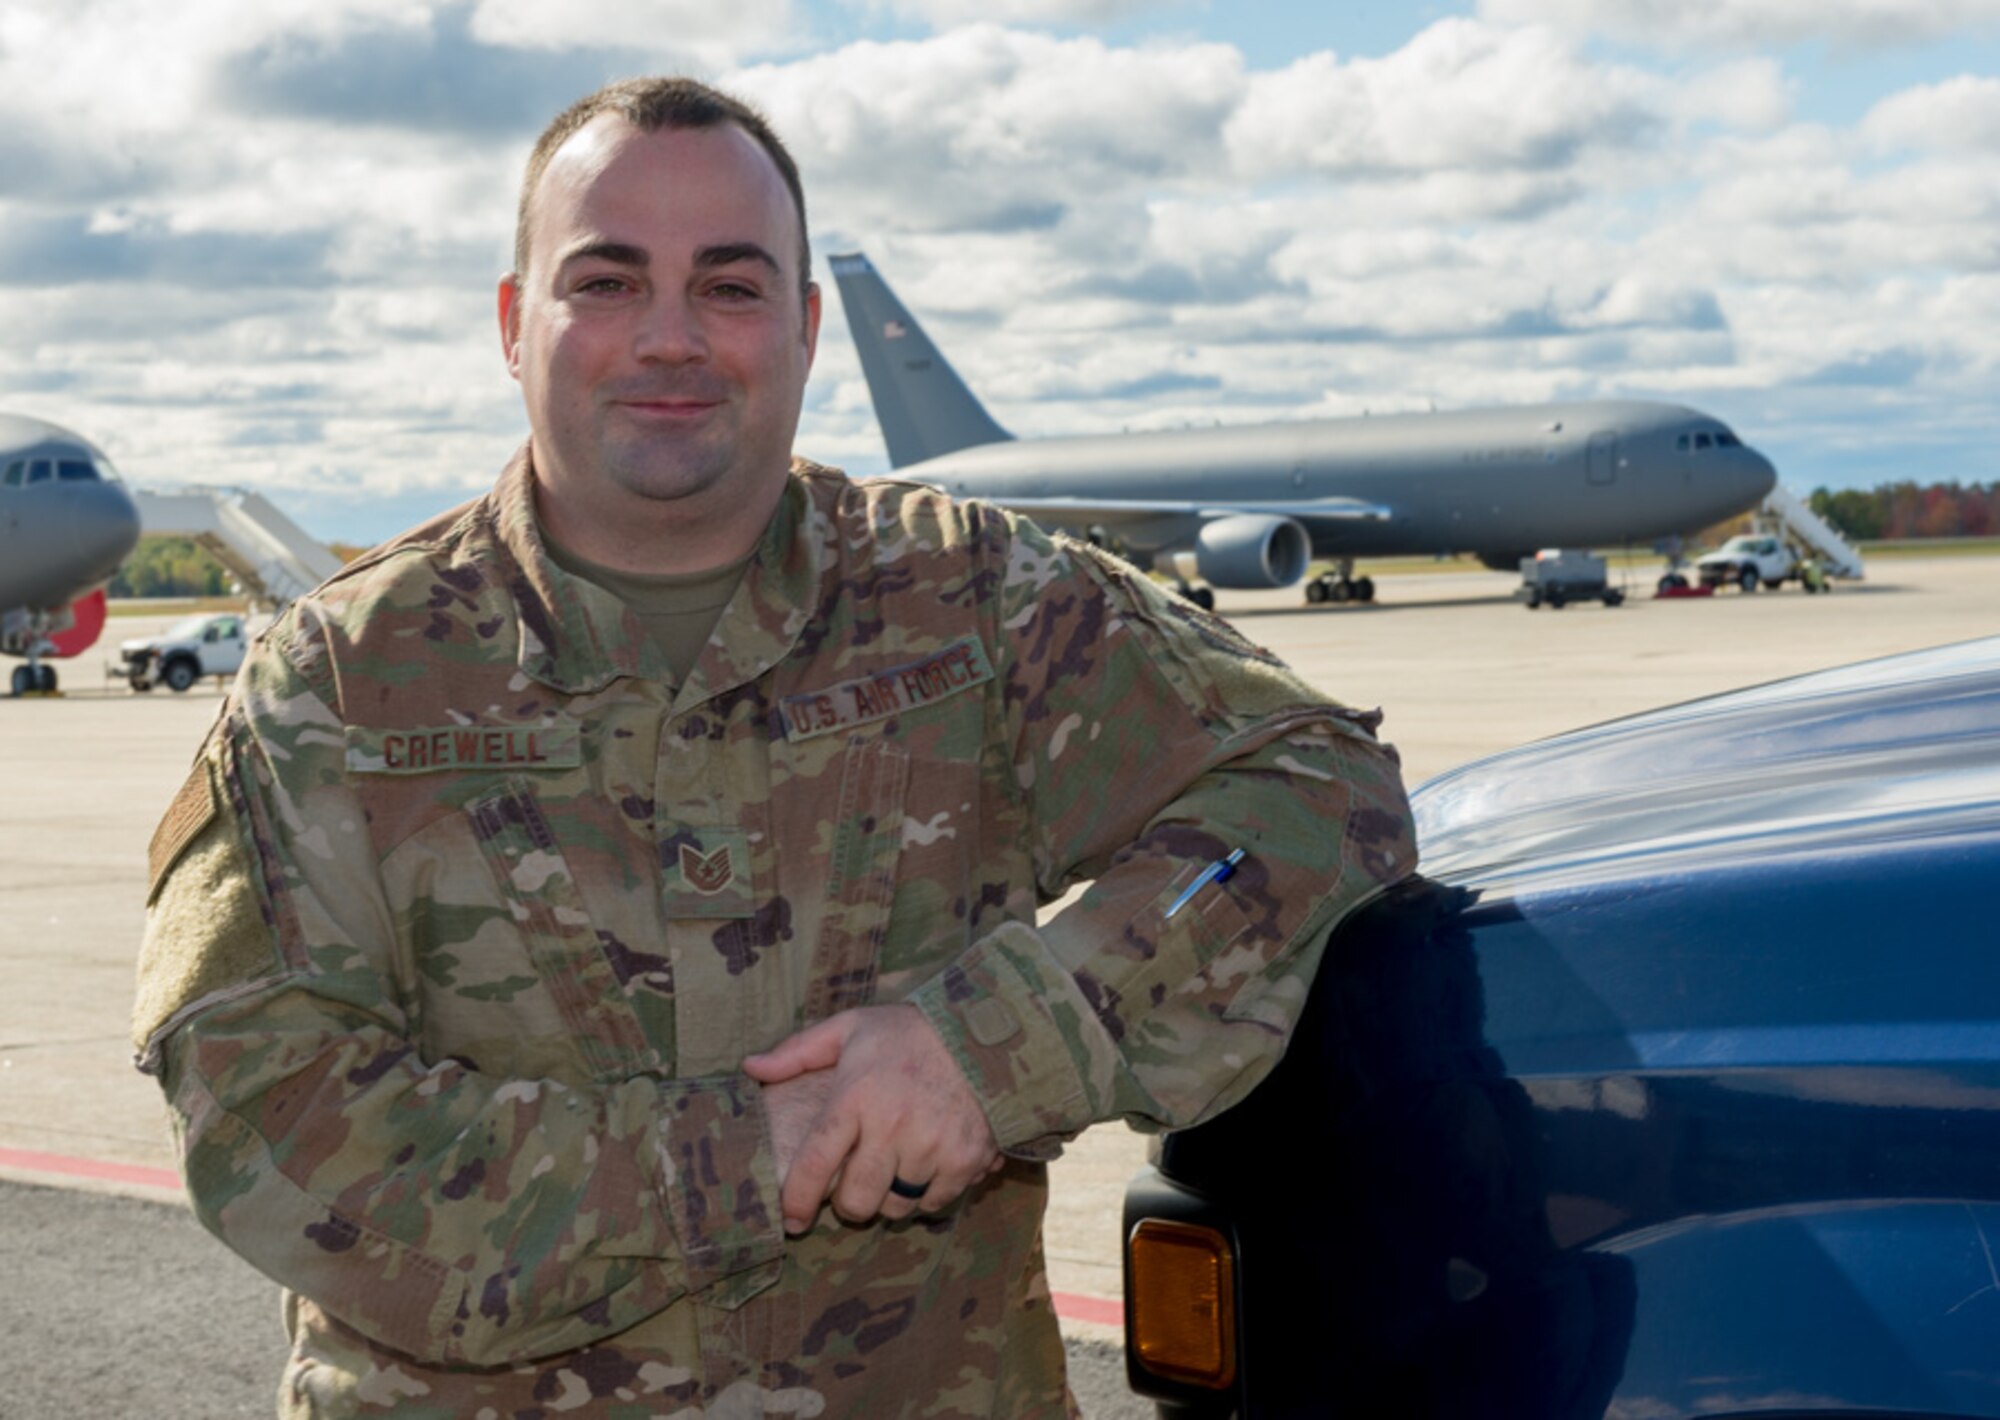 Tech. Sgt. Robert Crewell, an airfield manager assigned to the 64th Air Refueling Squadron, 157th Air Refueling Wing, Oct. 18, 2019, at Pease AIr National Guard Base, N.H. (U.S. Air National Guard photo by Tech. Sgt. Aaron Vezeau)